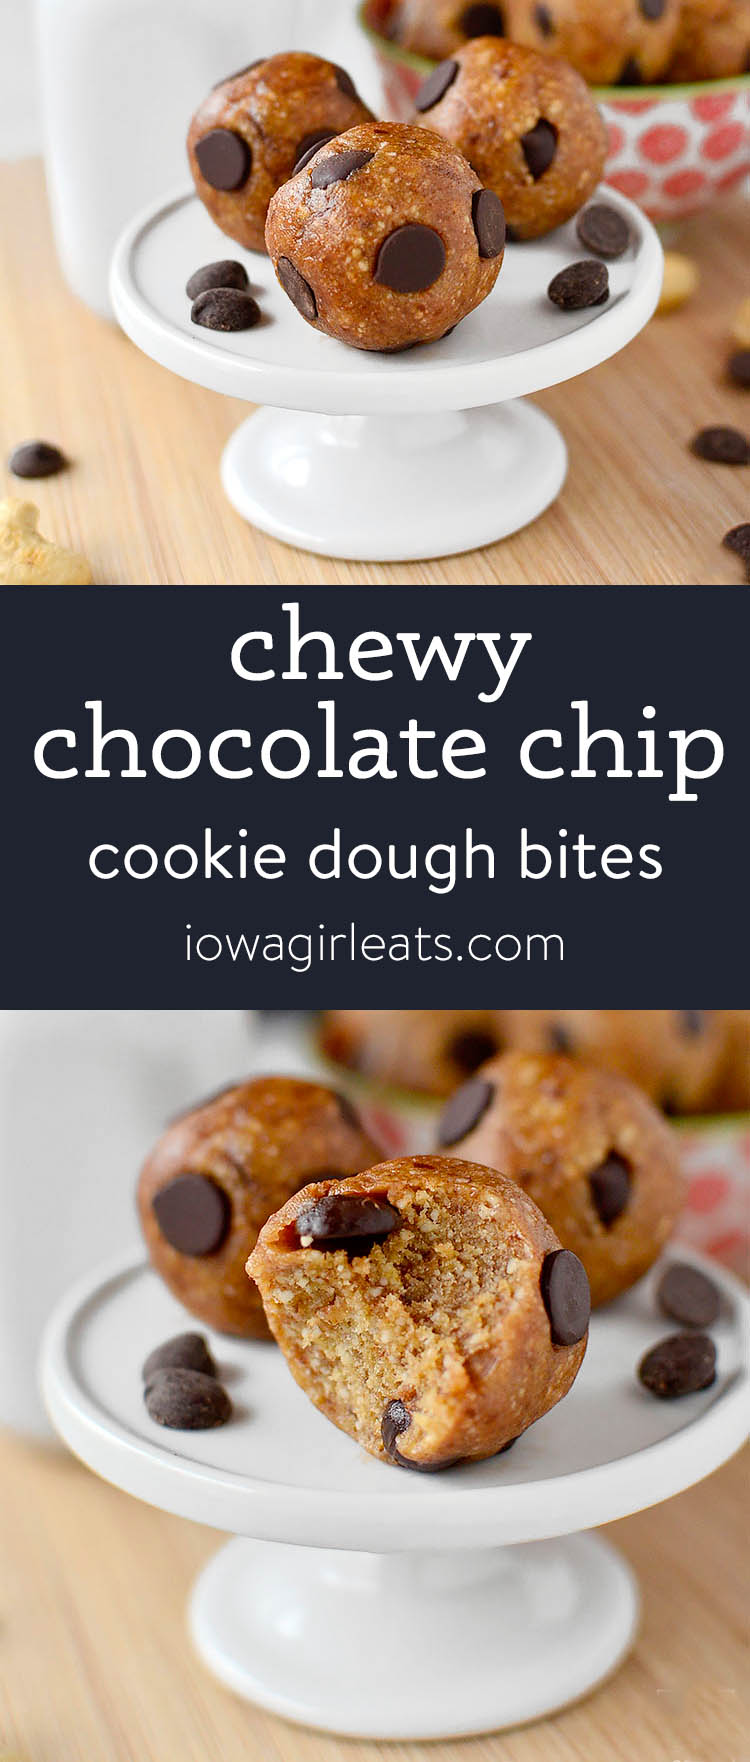 Photo collage of chewy chocolate chip cookie dough bites